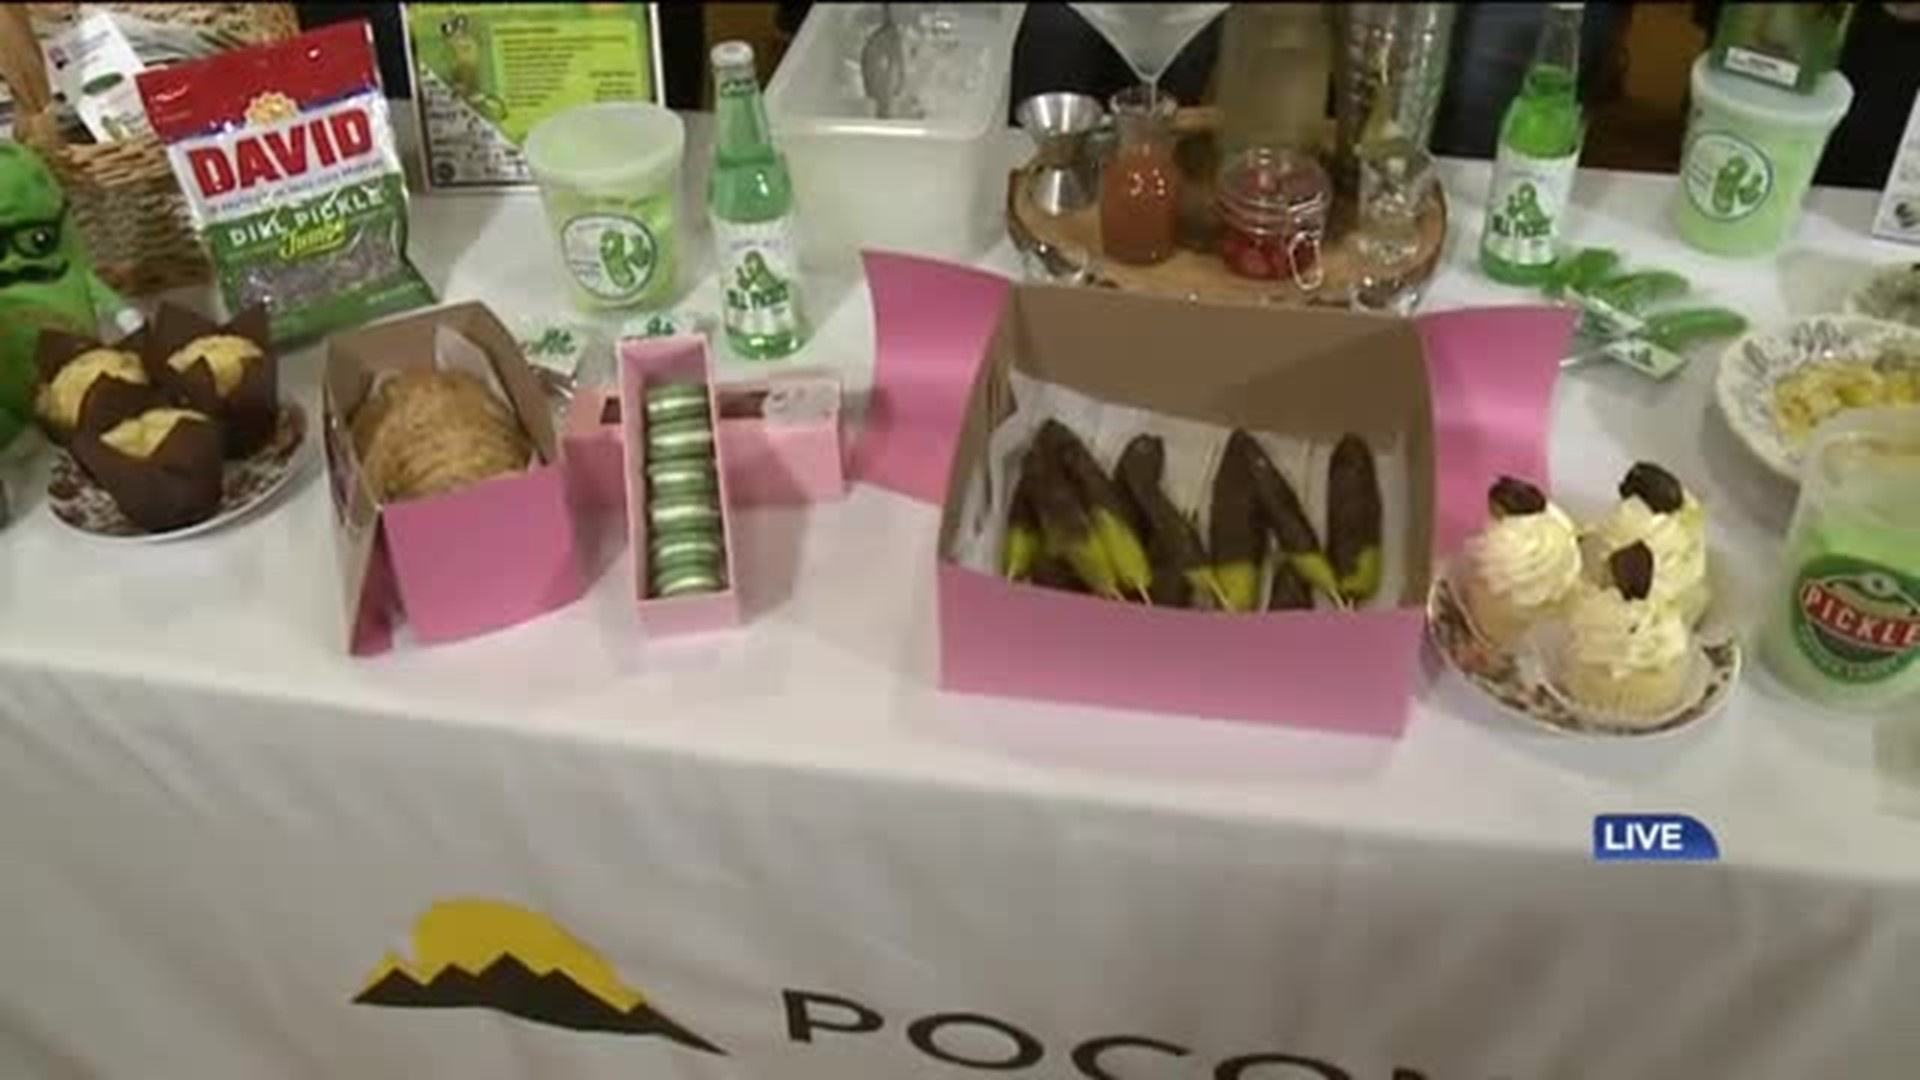 New Pickle Festival Coming to the Poconos